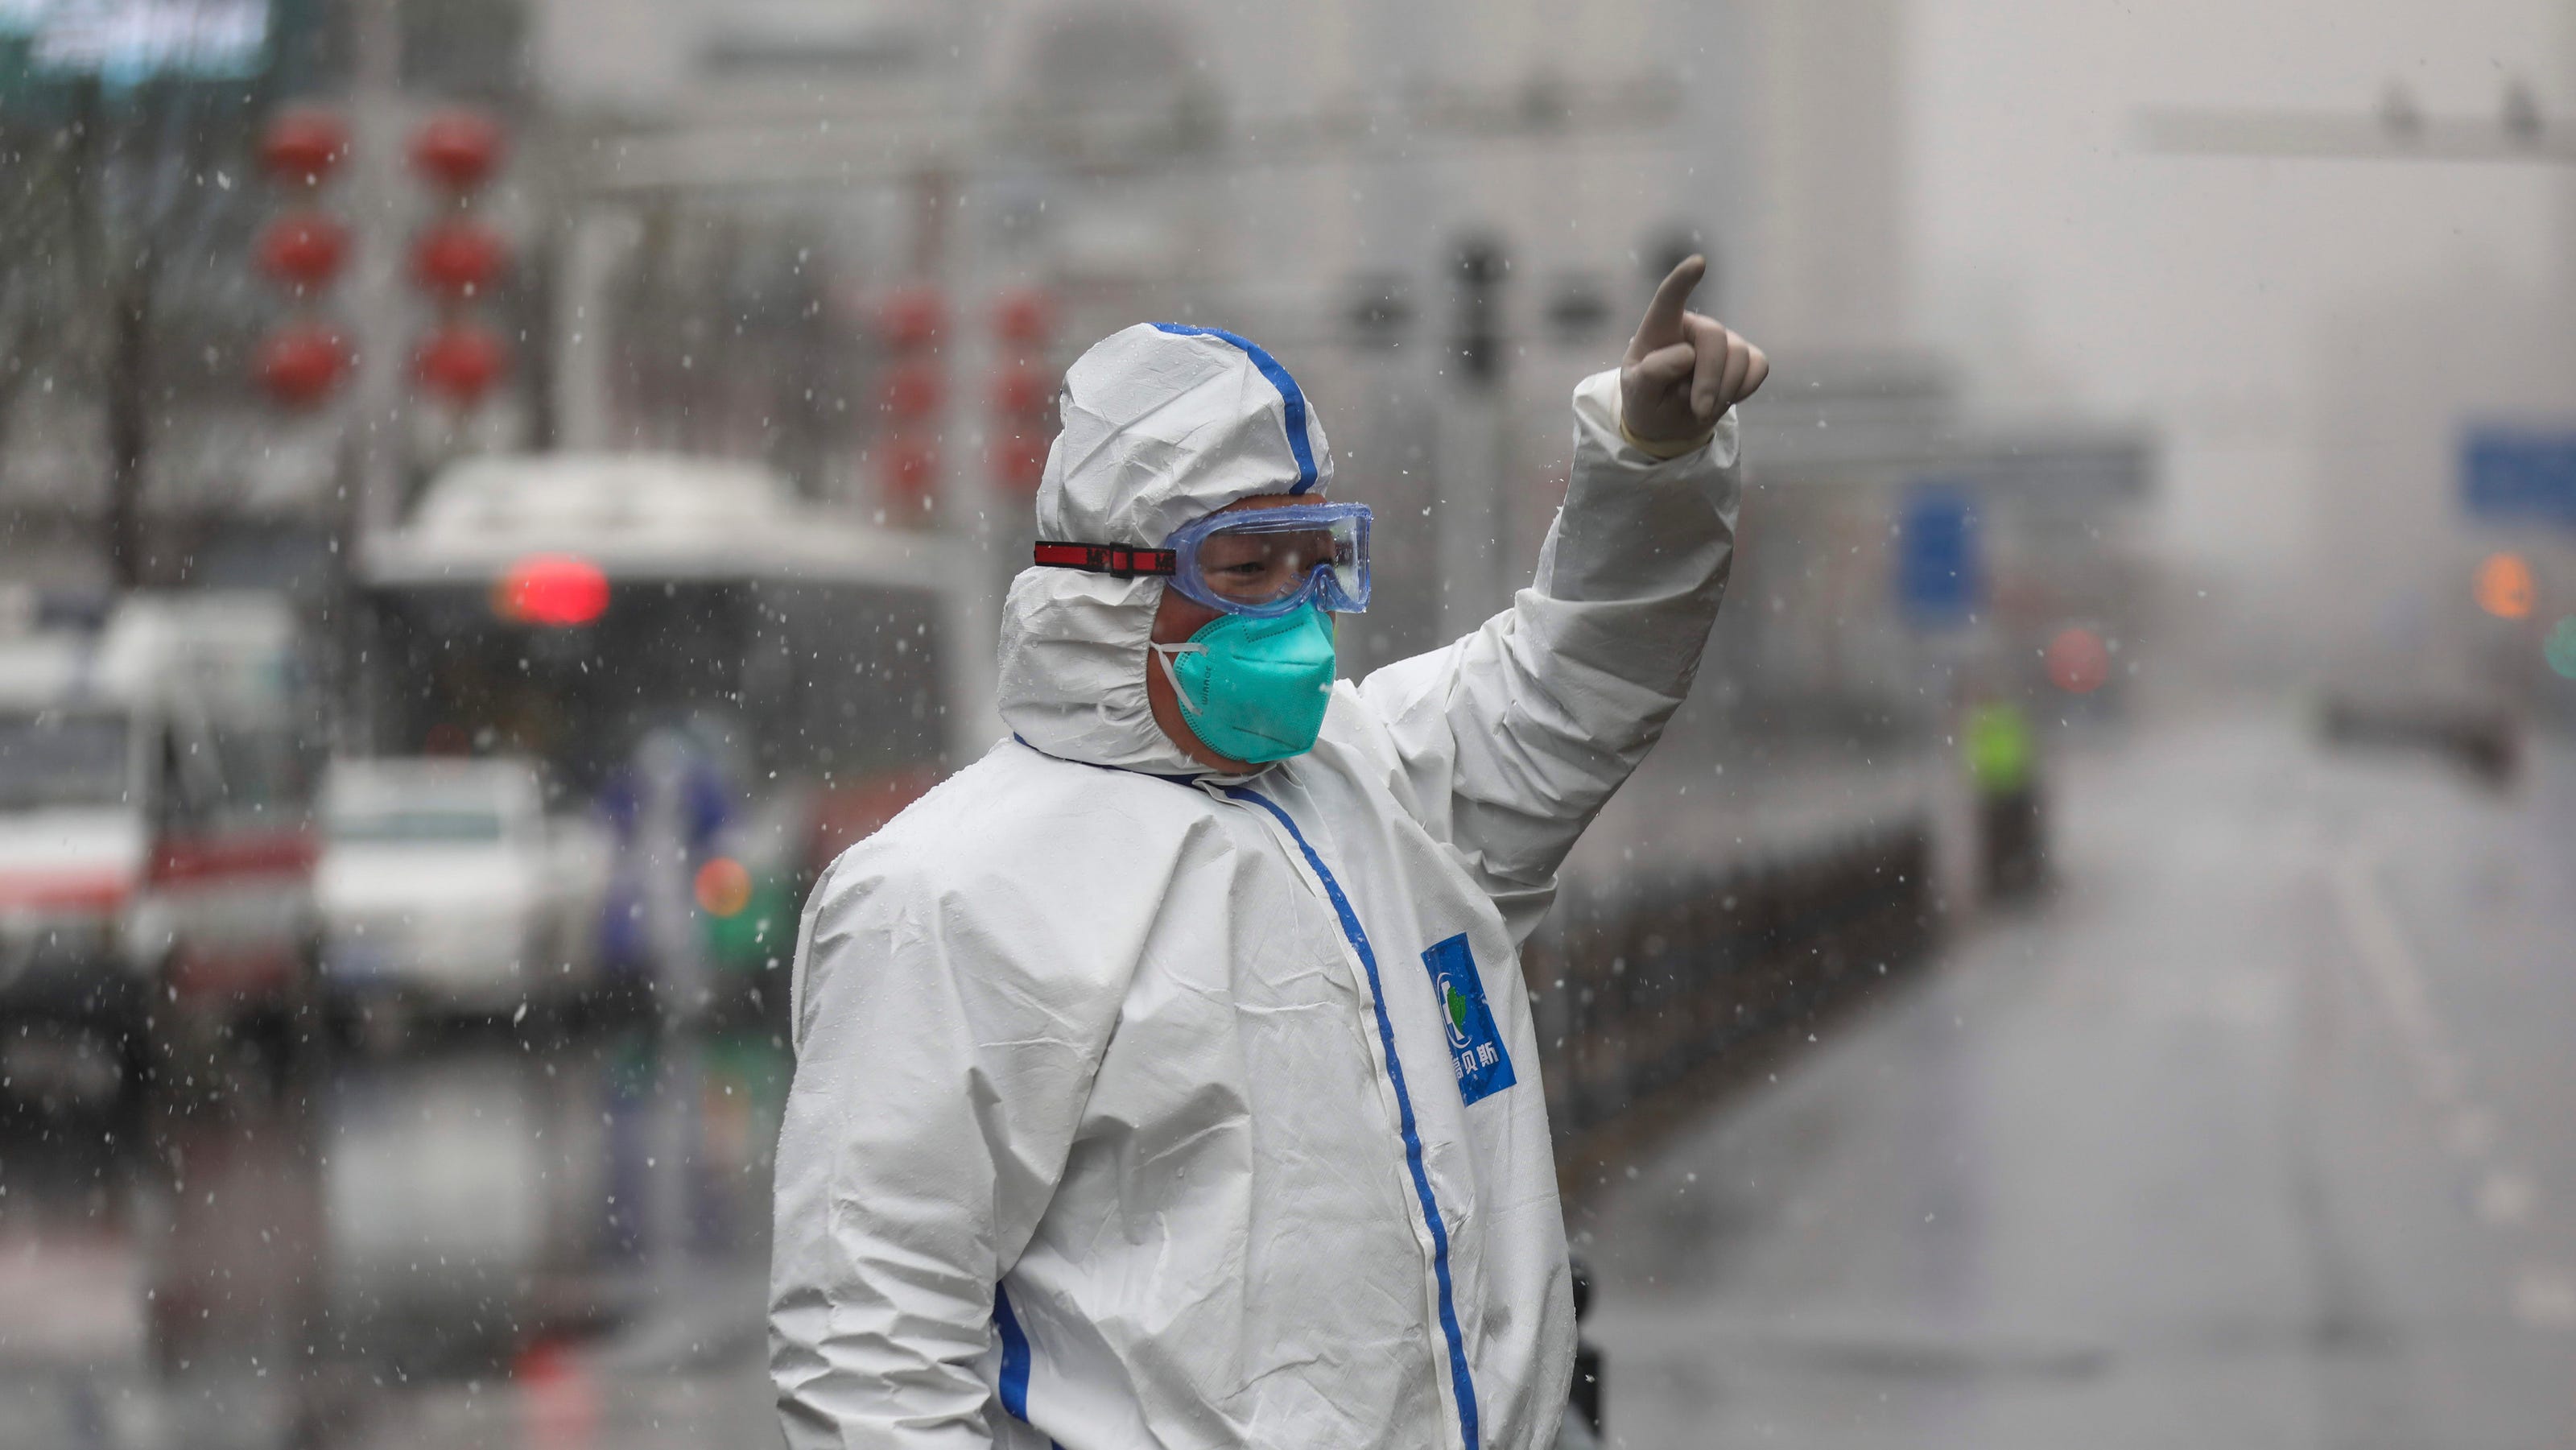 Coronavirus: France reports death of Chinese tourist, first in Europe3 日前